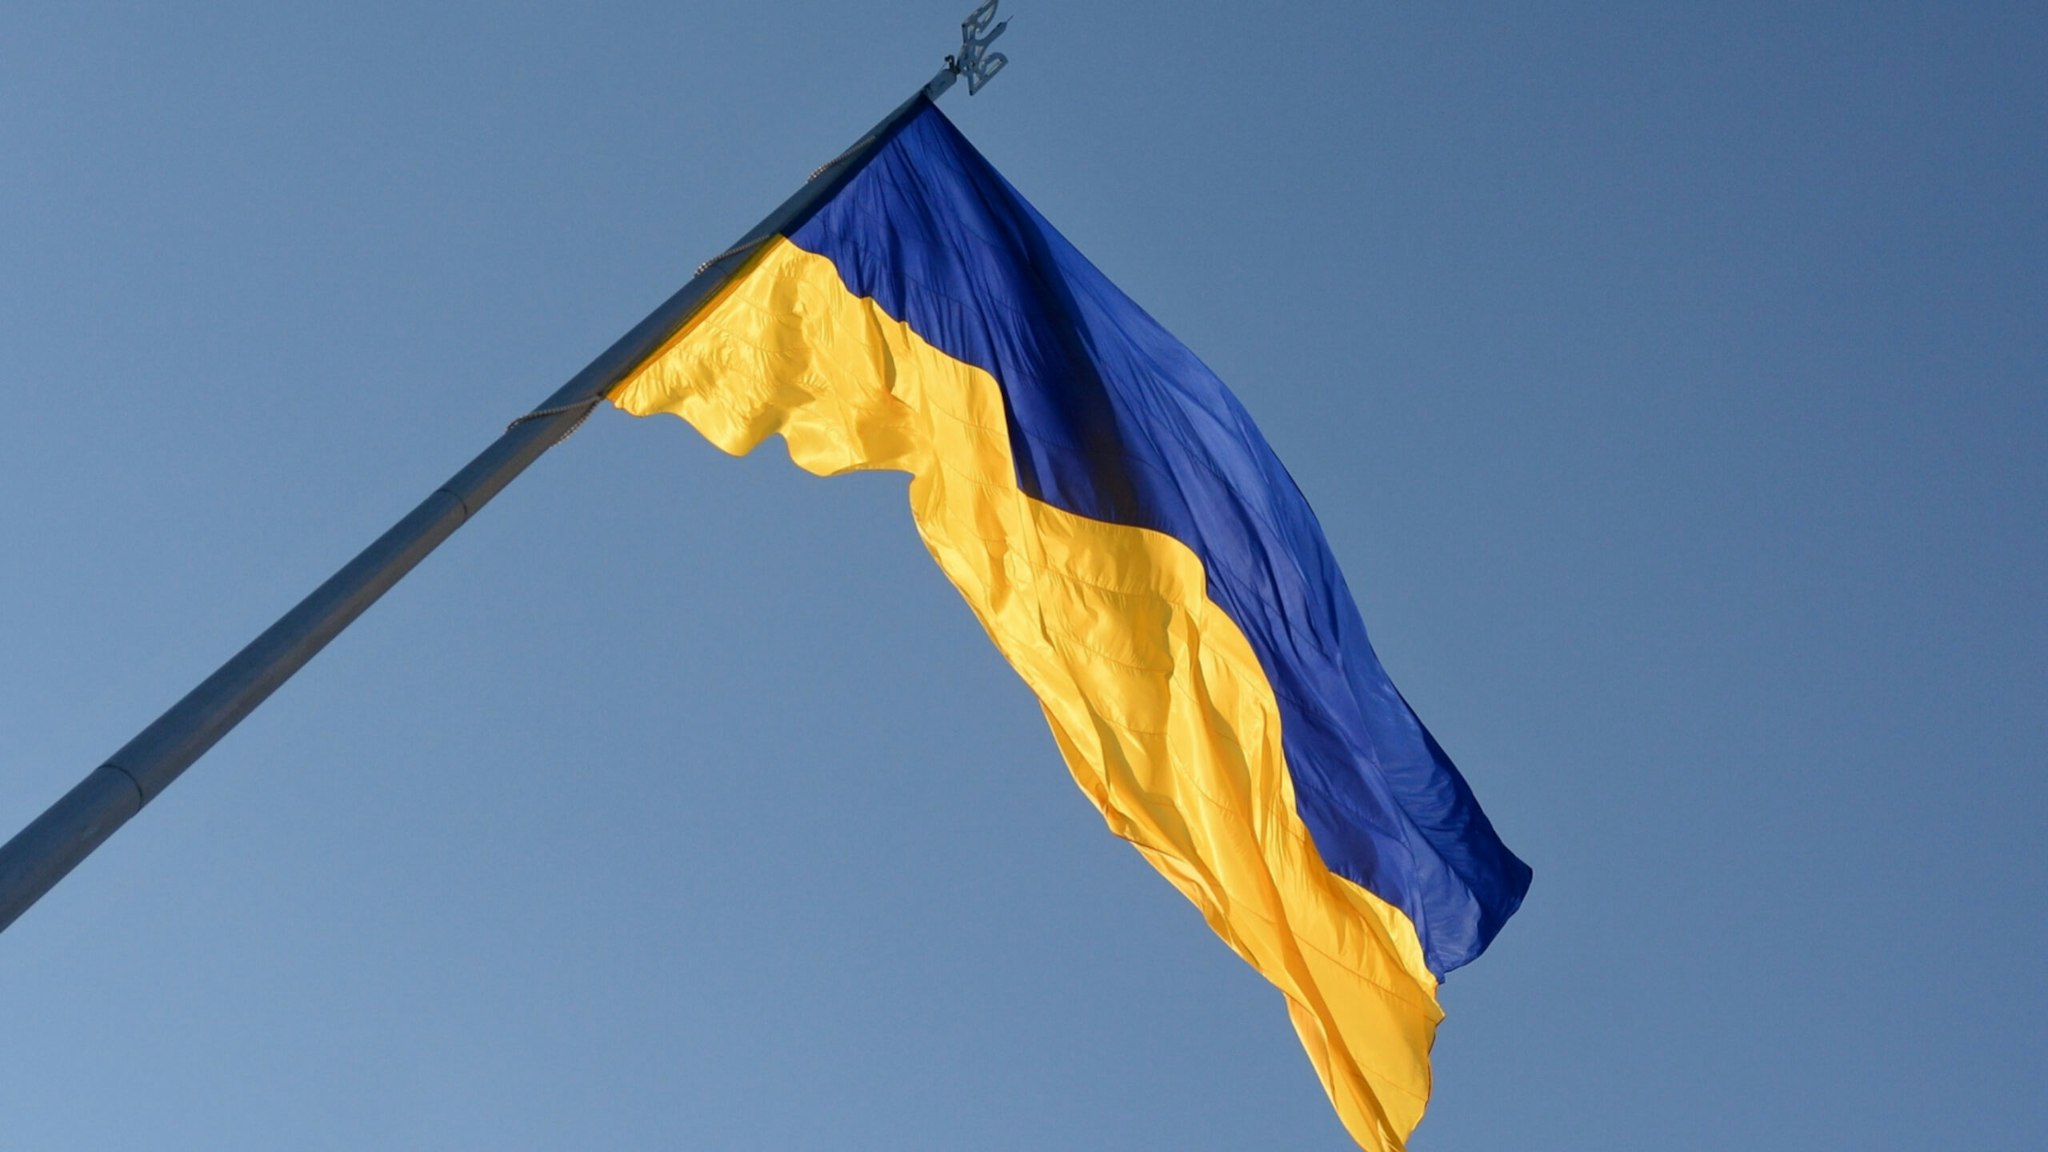 Ukraine's biggest flag flies some 90 metres above the city as it has been installed on the eve of the State Flag Day, with the Motherland Monument at centre in Kyiv.